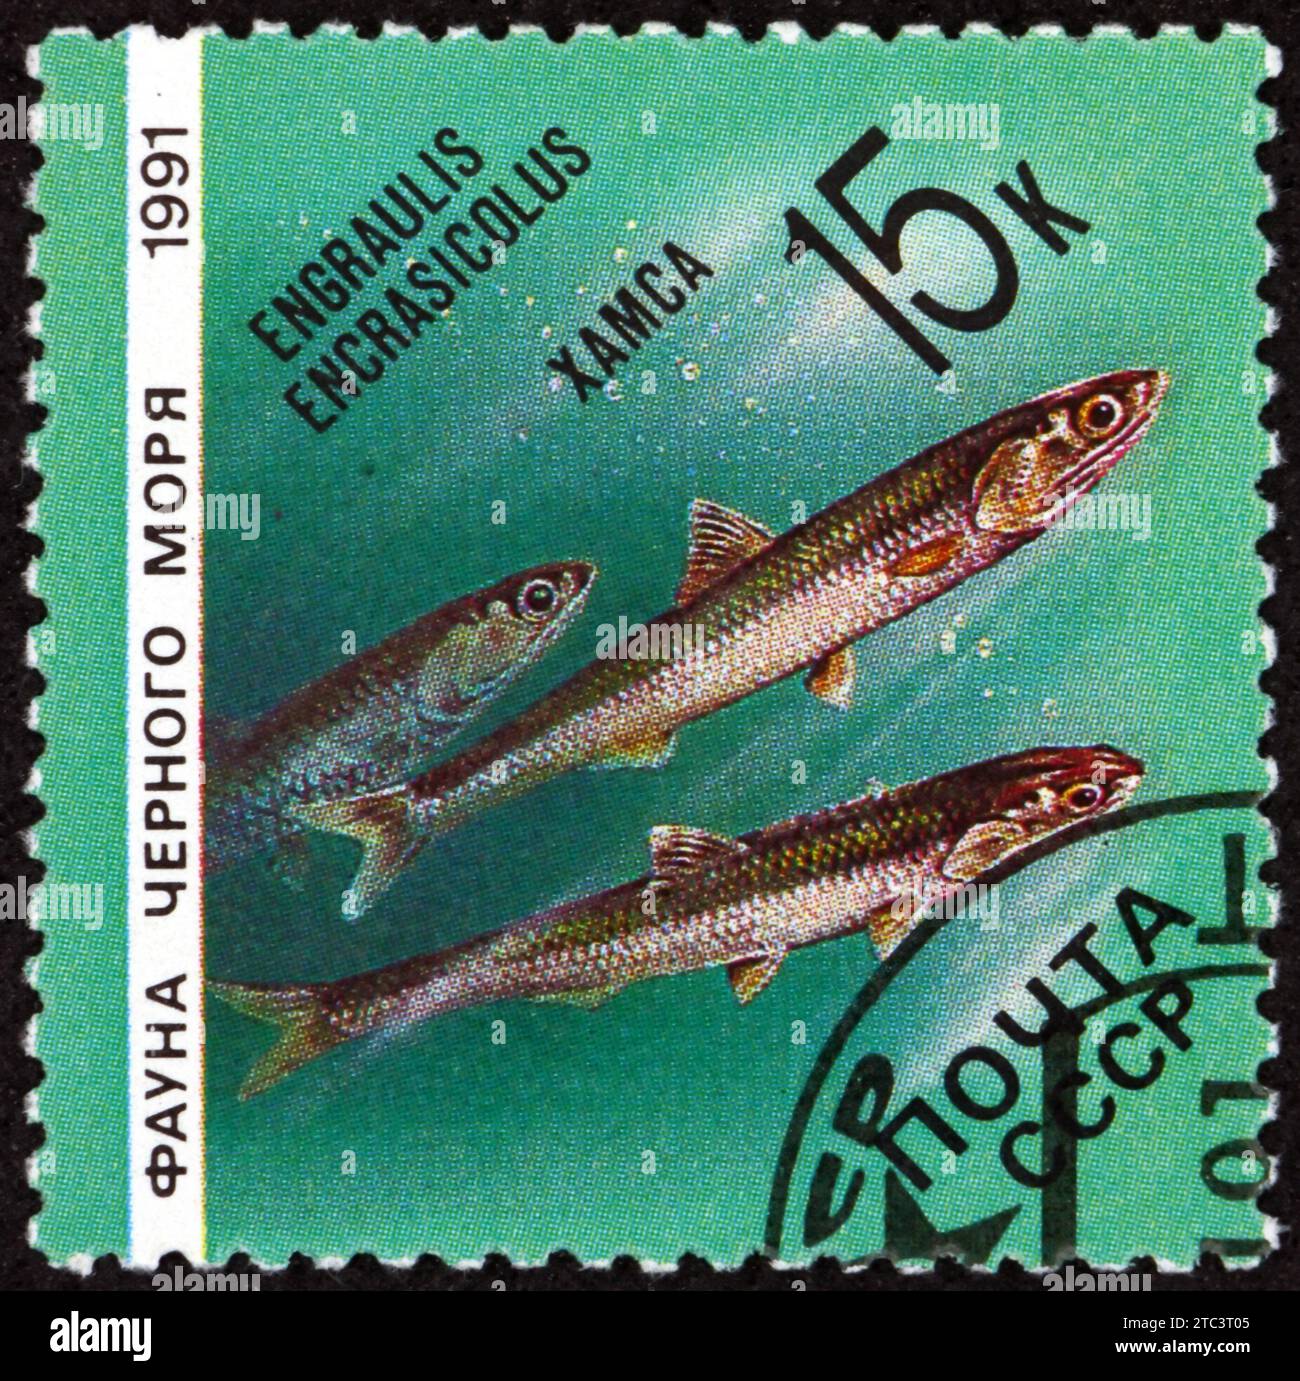 RUSSIA - CIRCA 1991: a stamp printed in Russia shows the European anchovy, engraulis encrasicolus, is a forage fish, circa 1991 Stock Photo